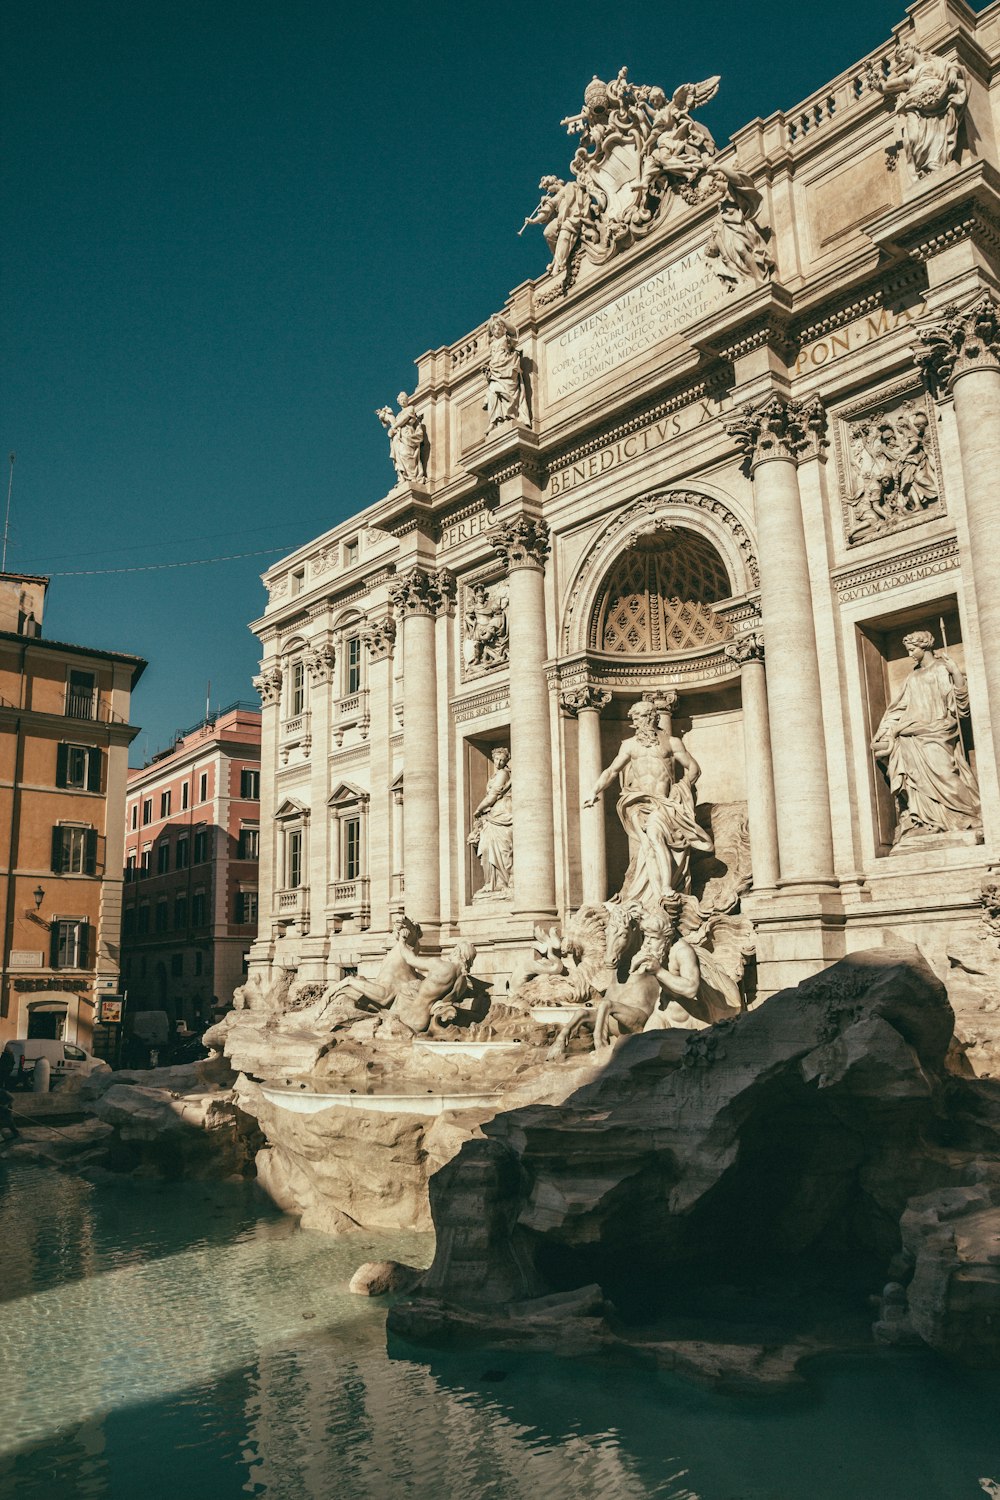 Trevi Fountain during daytime